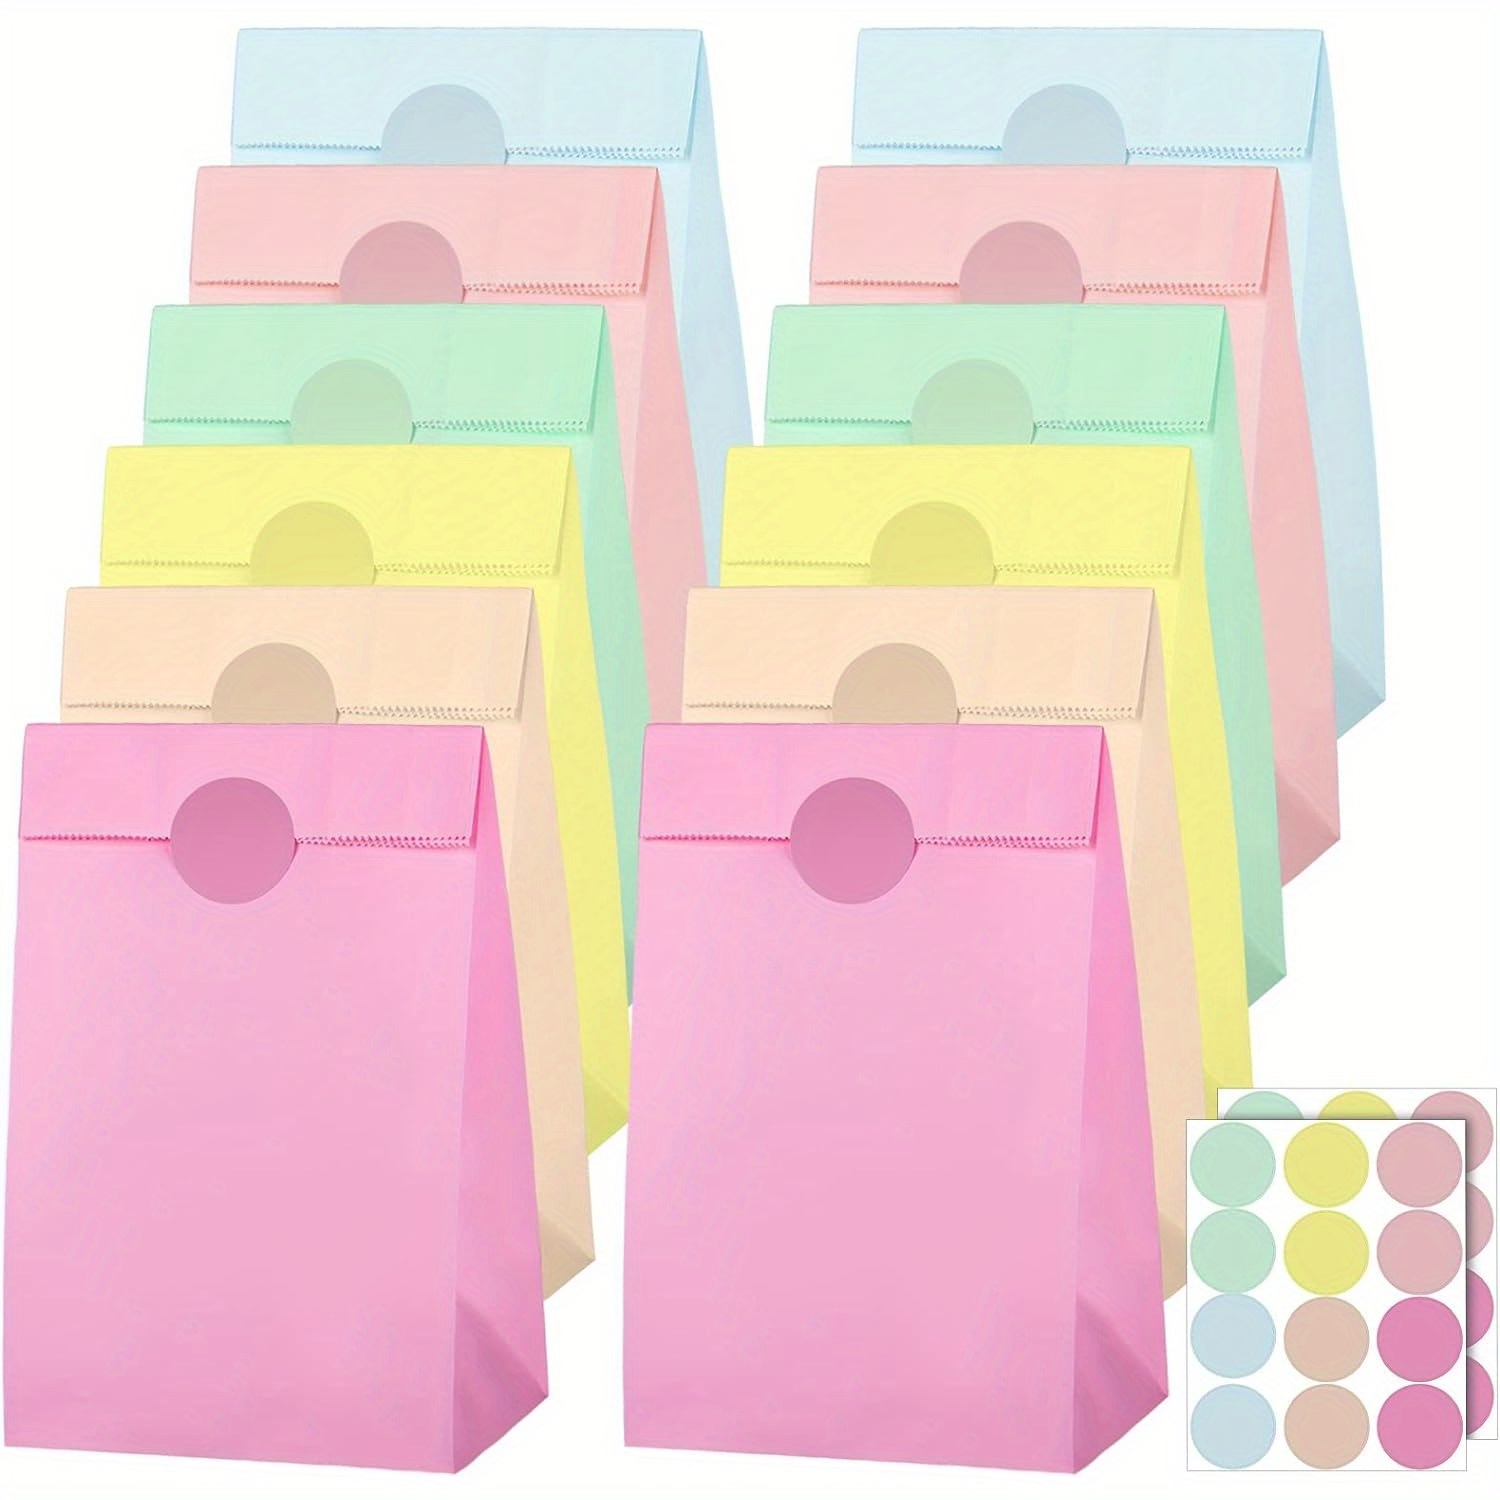 

12 Pack Of Pastel Colored Gift Bags With 12 Stickers - Perfect For Parties, Weddings, Or Any Special Occasion - Made Of Paper